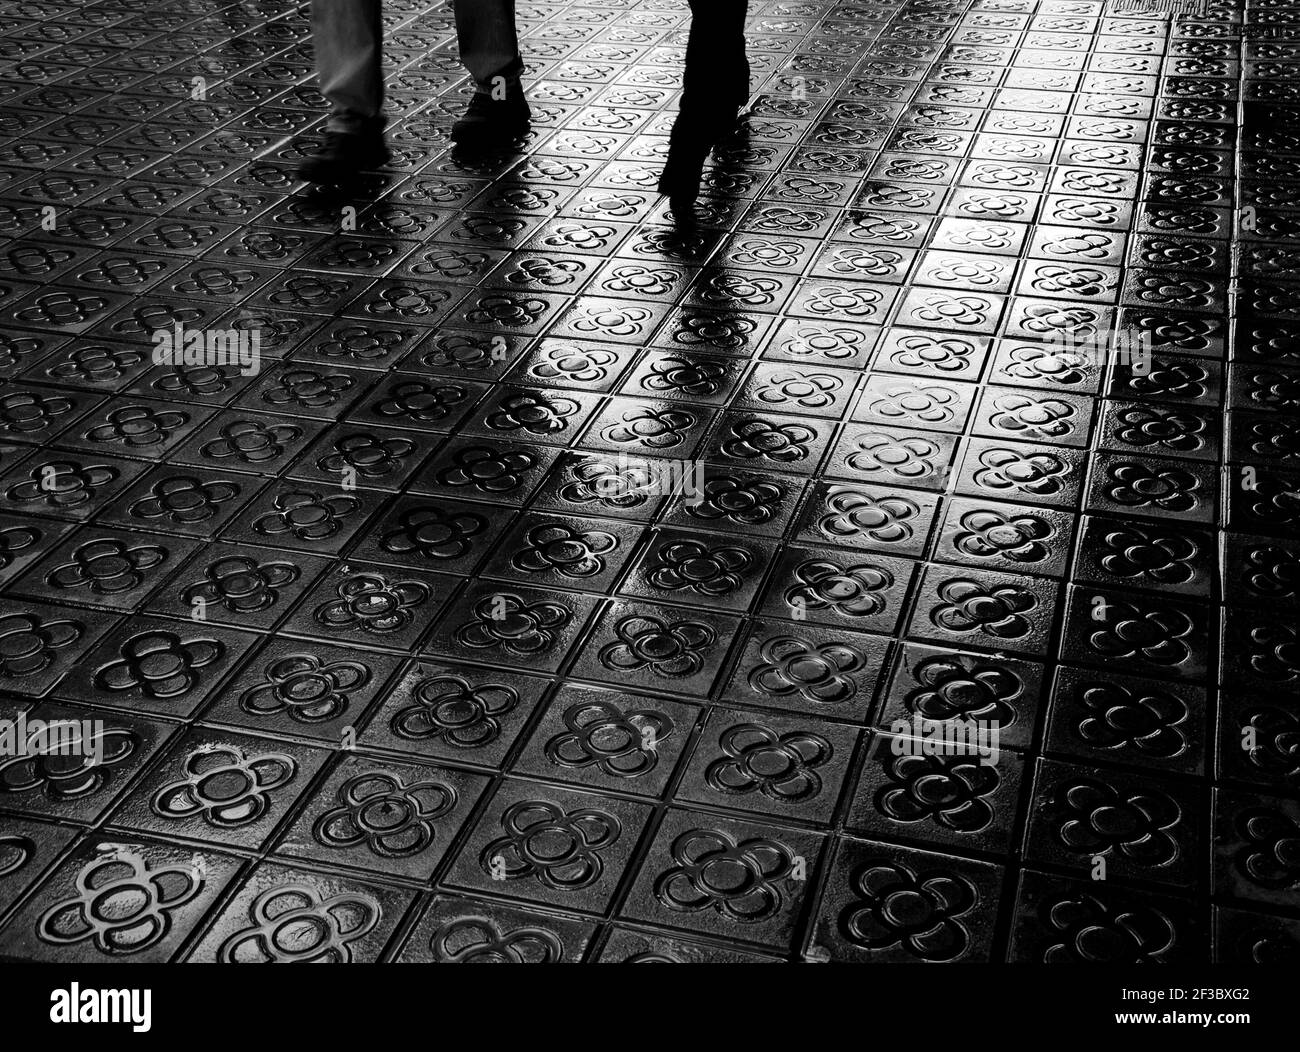 Barcelona, Spain. Couple legs and their reflection on wet flower street paving. Romantic vacation background. Black and white photo. Stock Photo